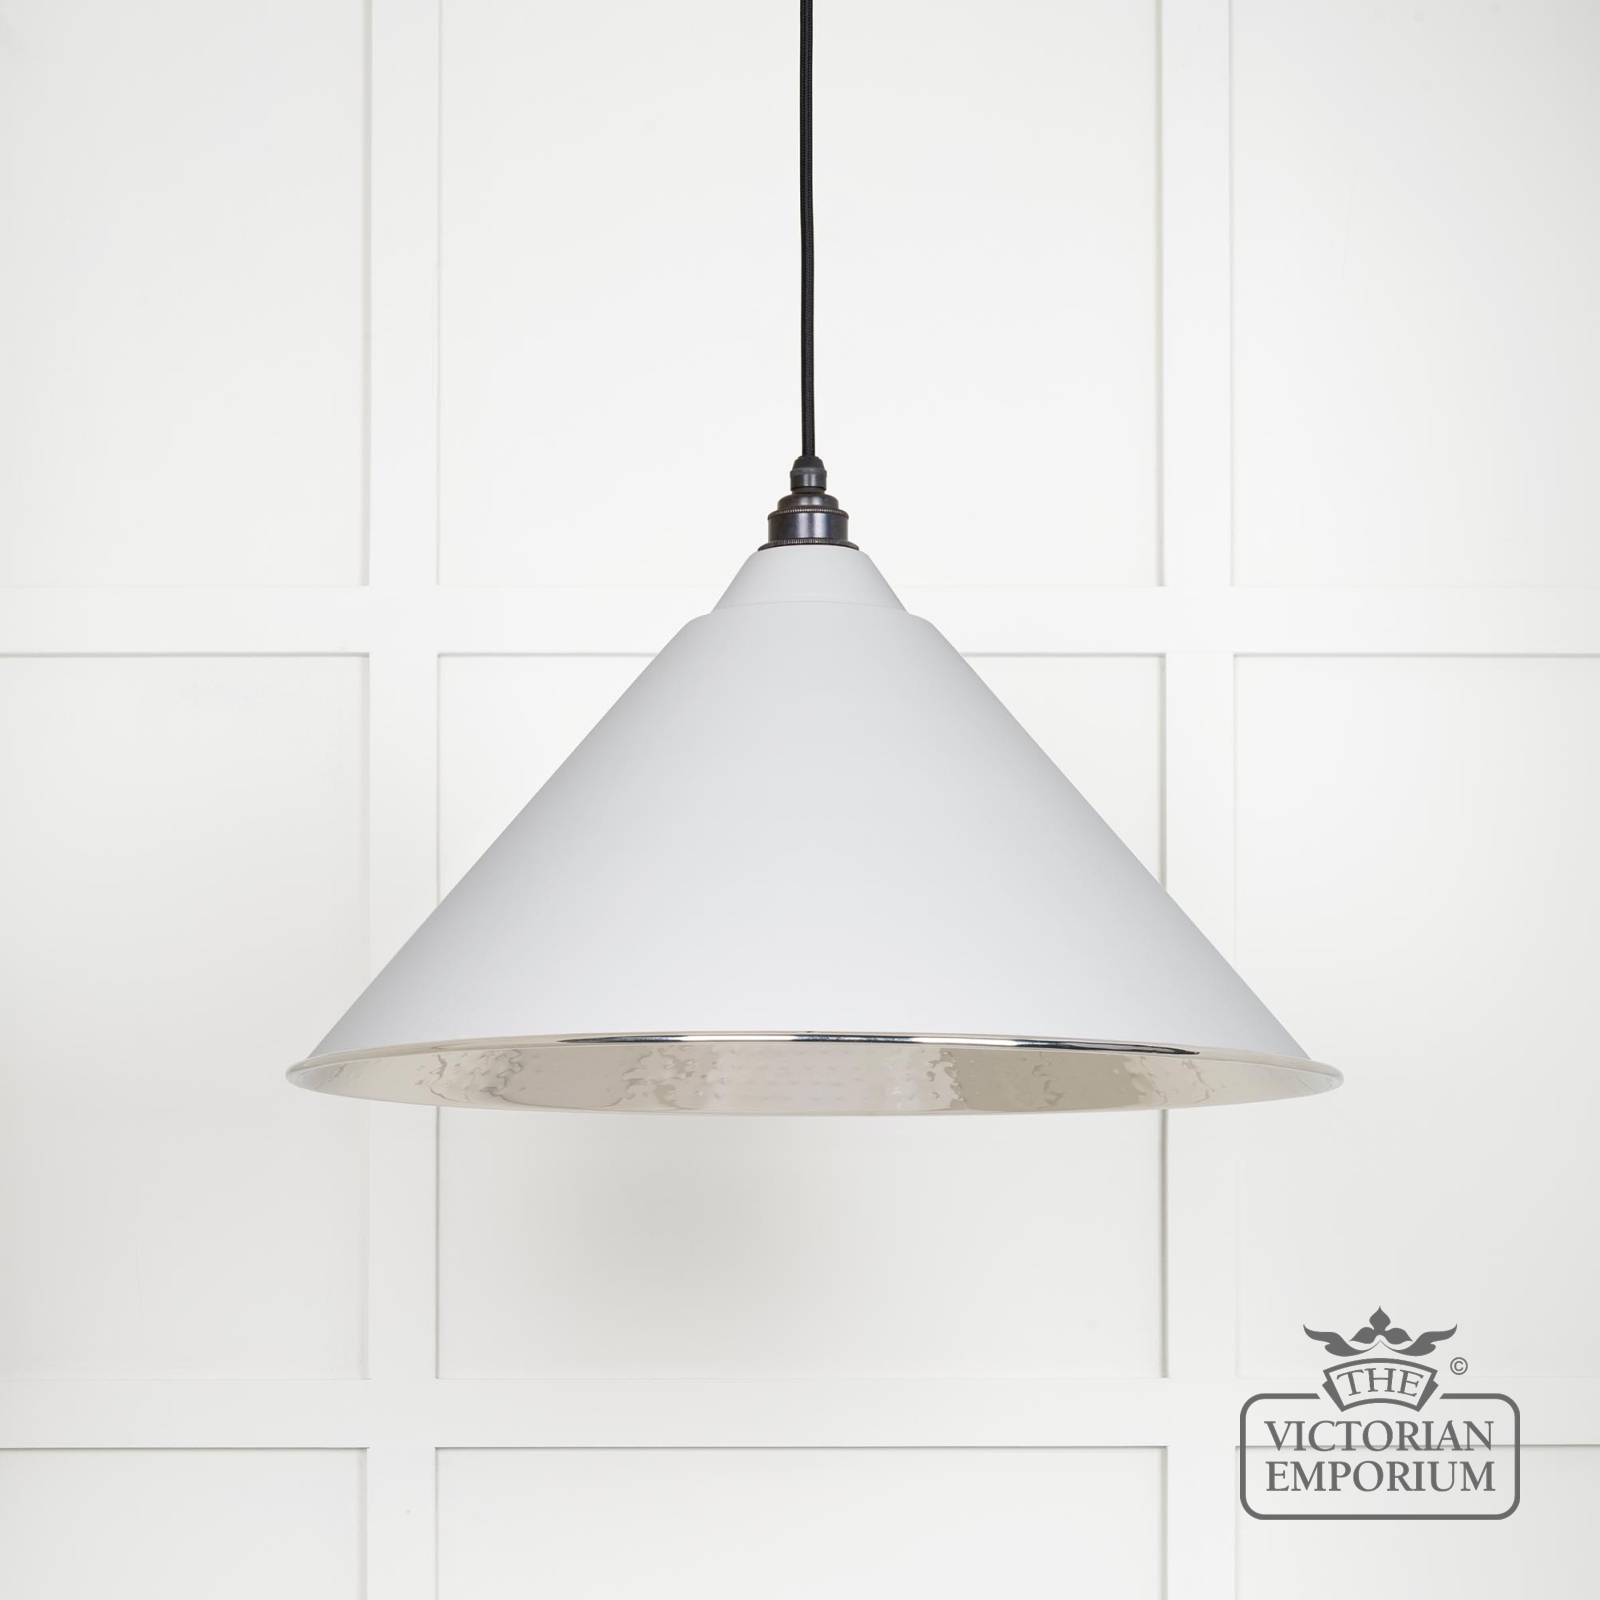 Hockliffe Pendant Light in Hammered Nickel and White Exterior